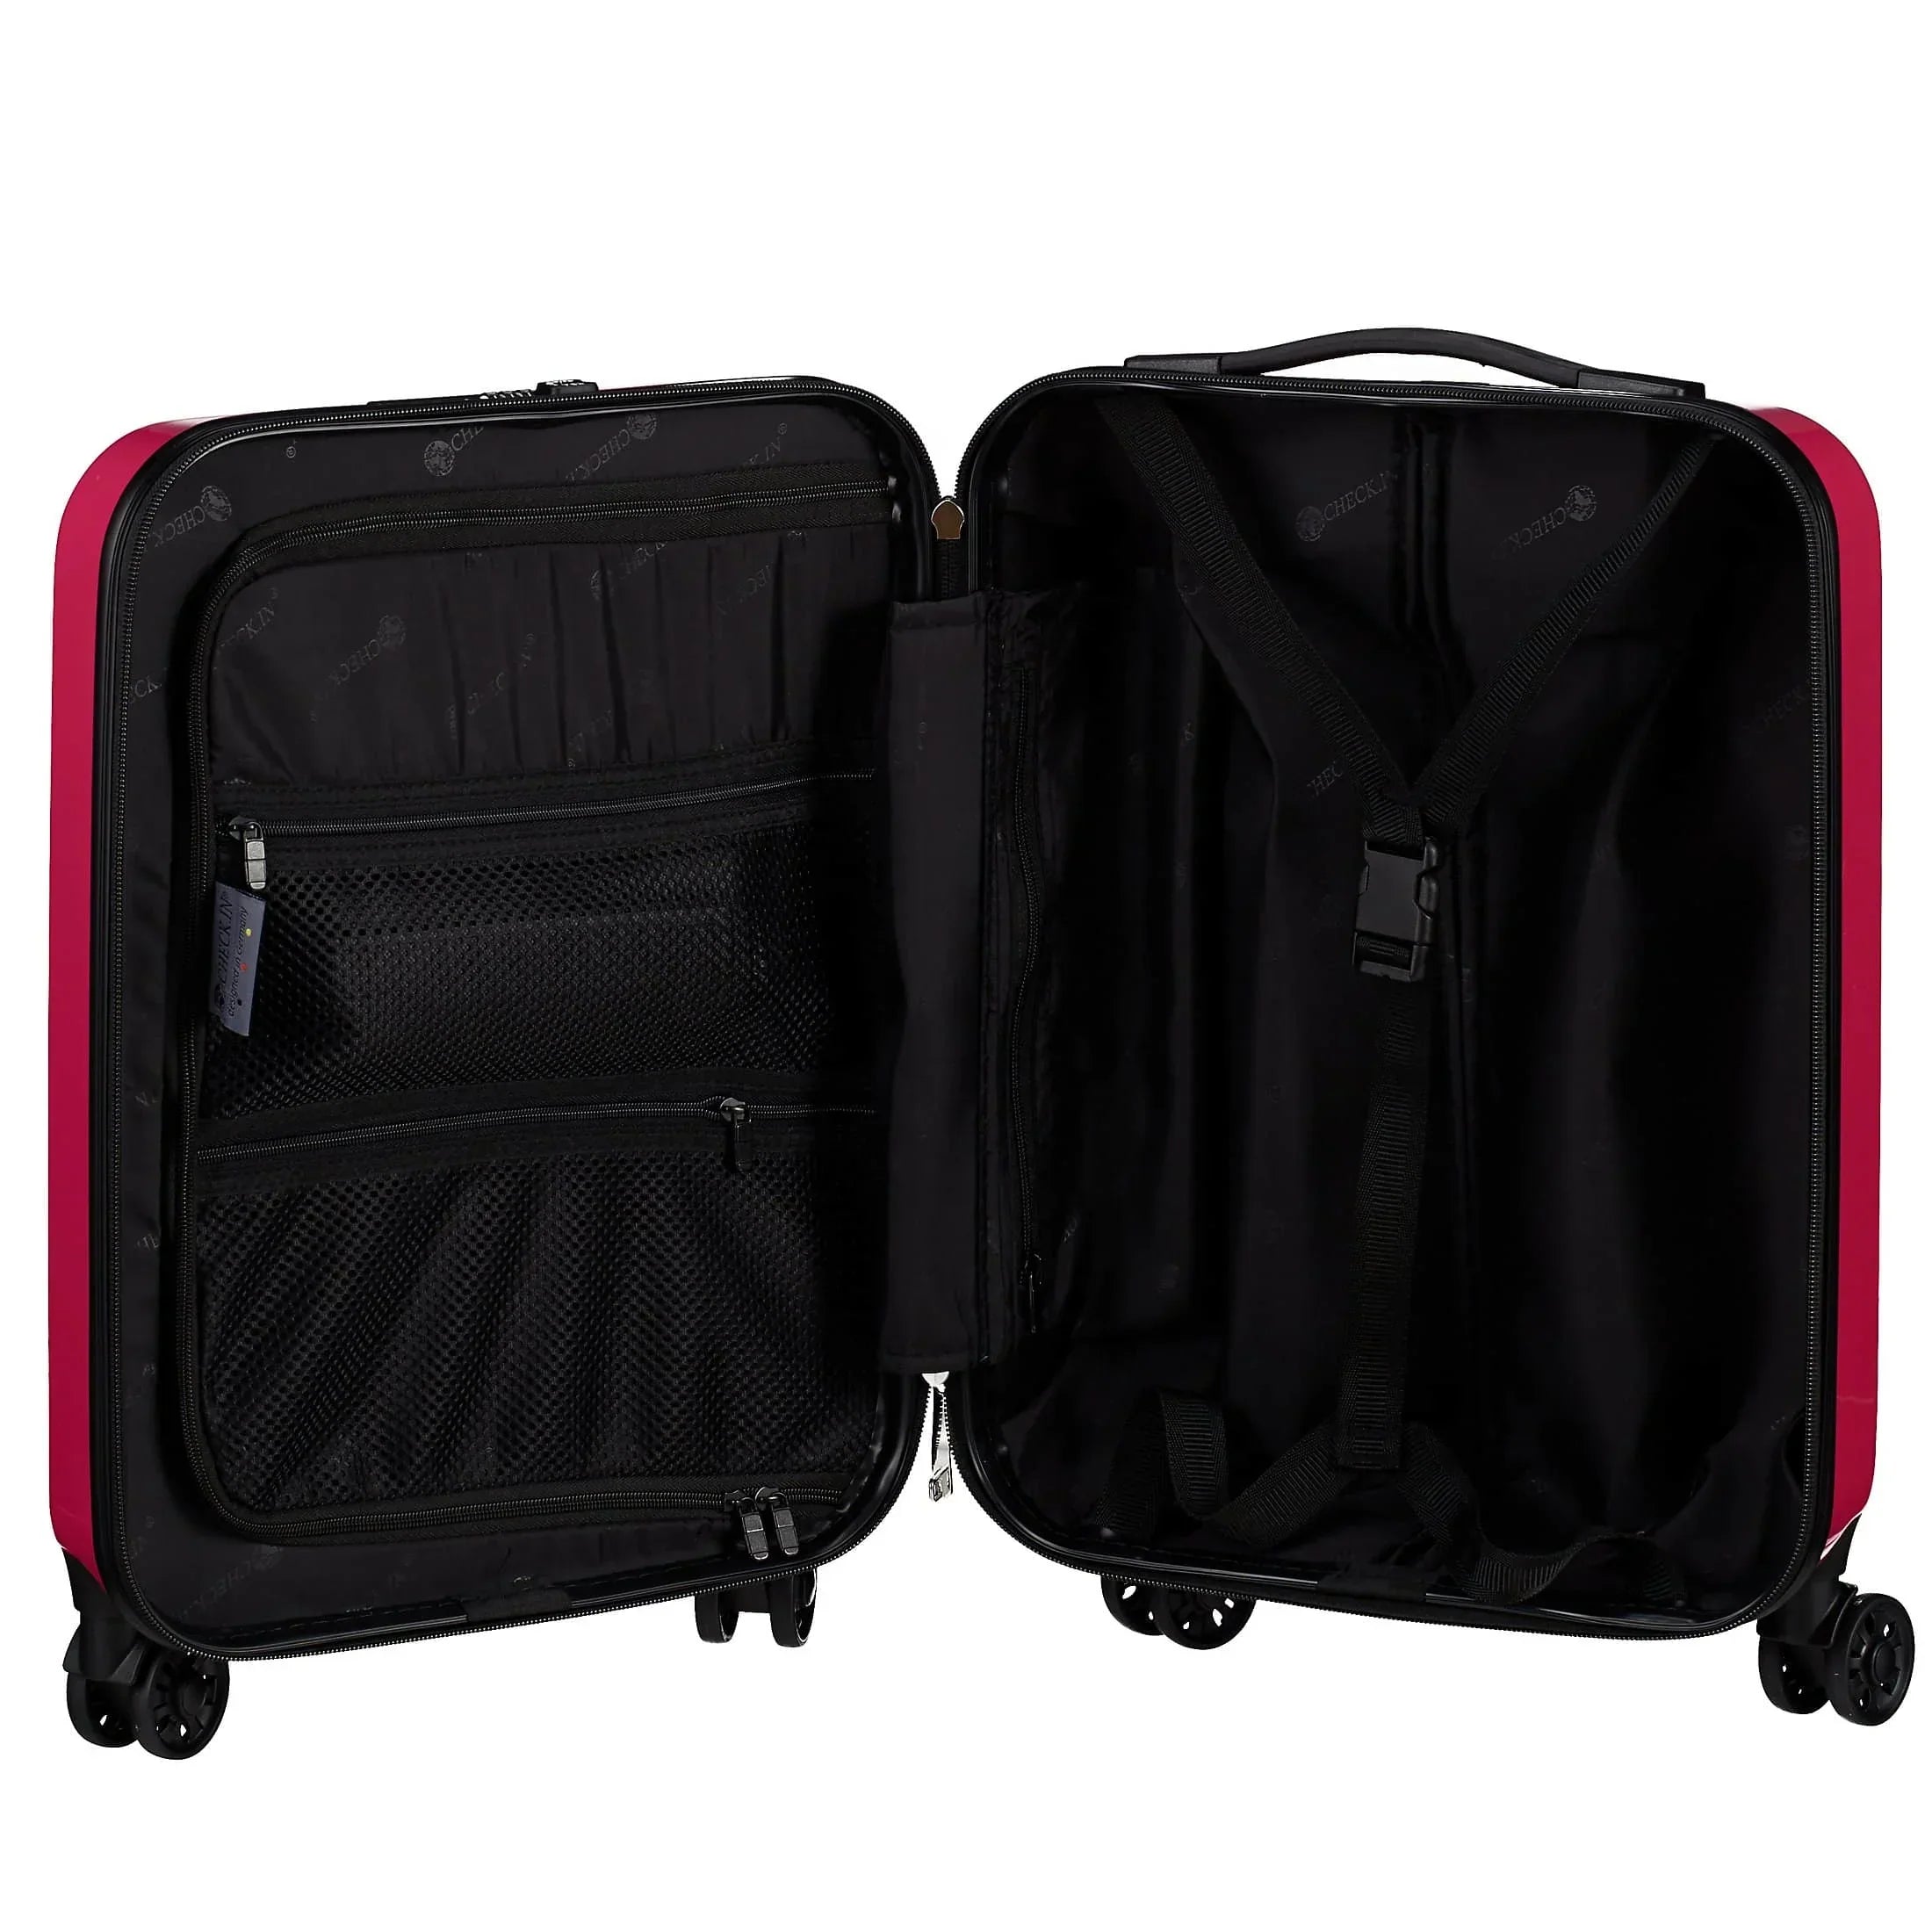 Check In London 2.0 4-Rollen-Kabinentrolley 50 cm - Rot